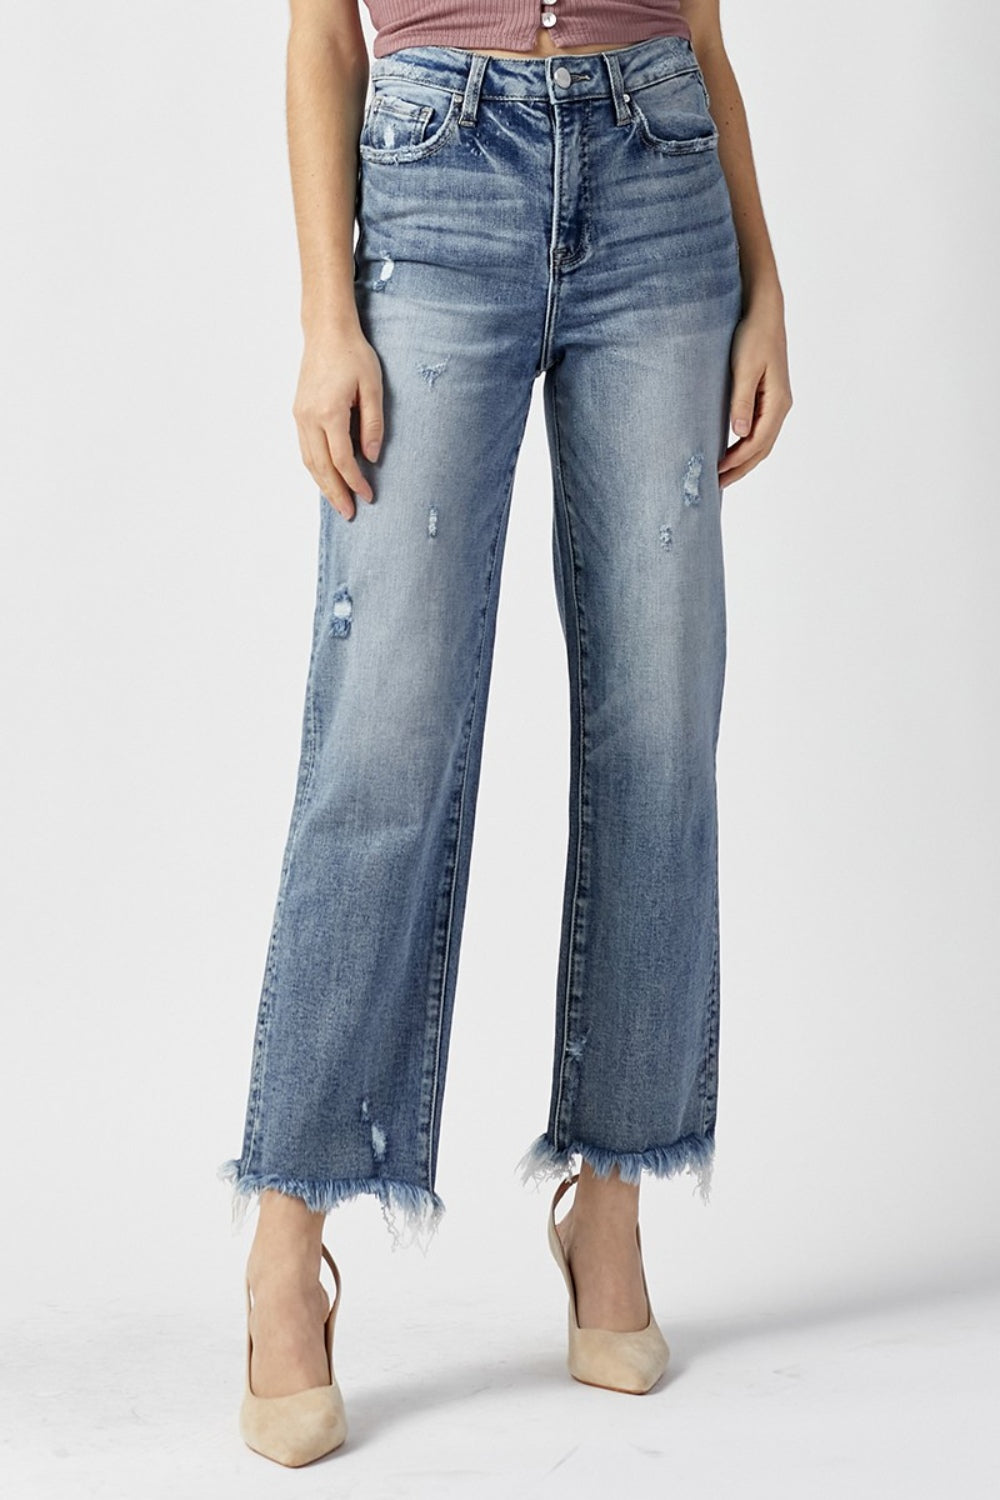 J Brand Wynne High Rise Crop Straight Jeans in Ambition, Size 25